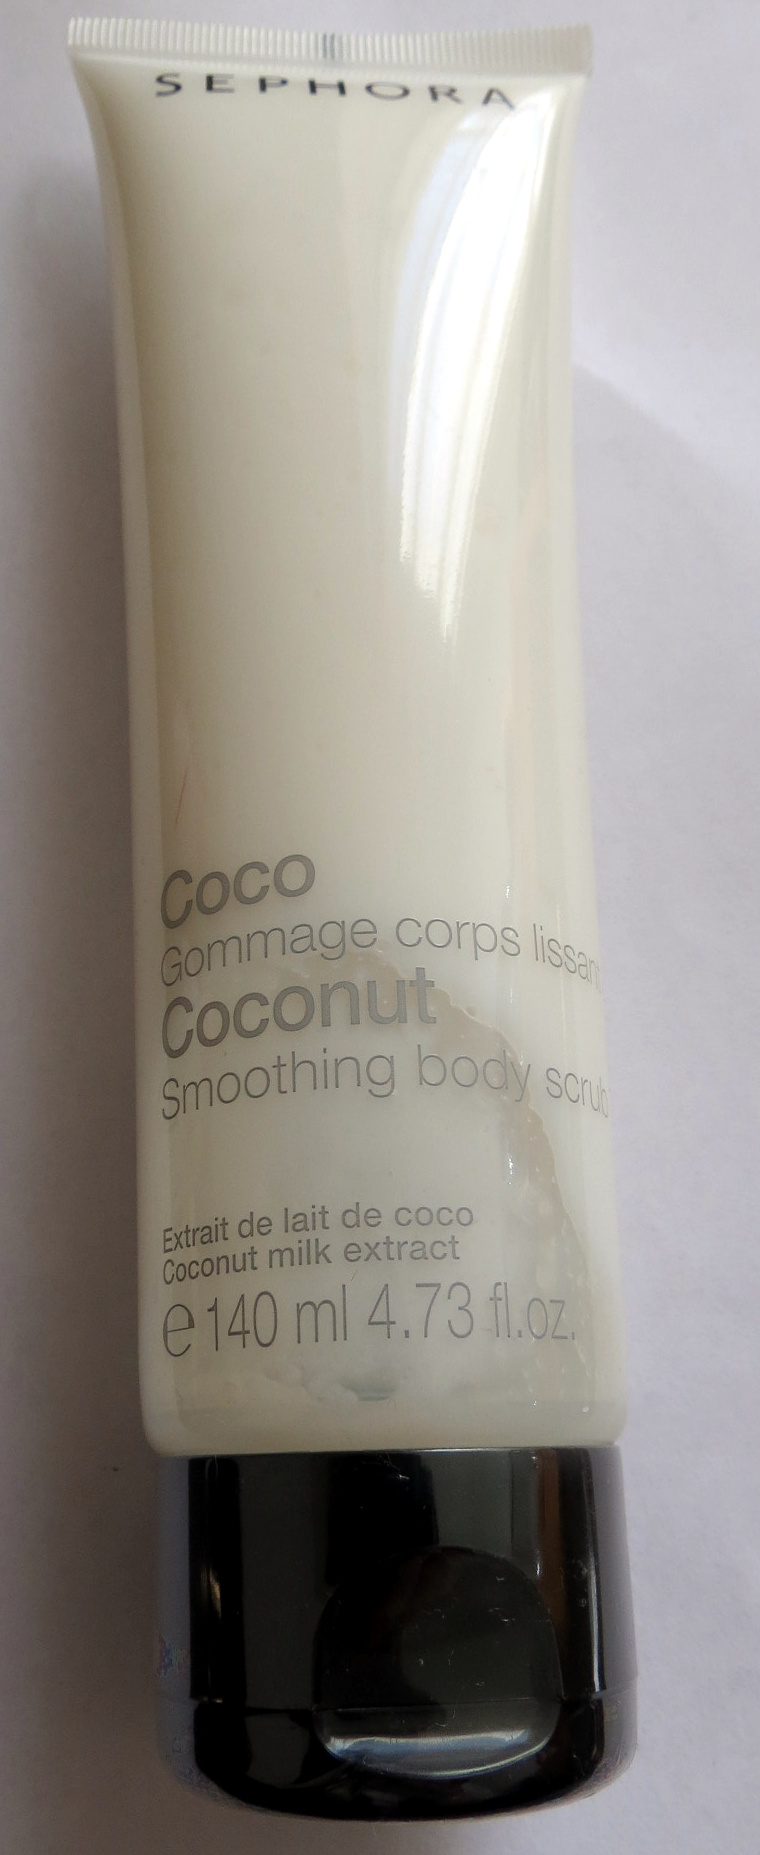 Coco gommage corps lissant - Tuote - fr